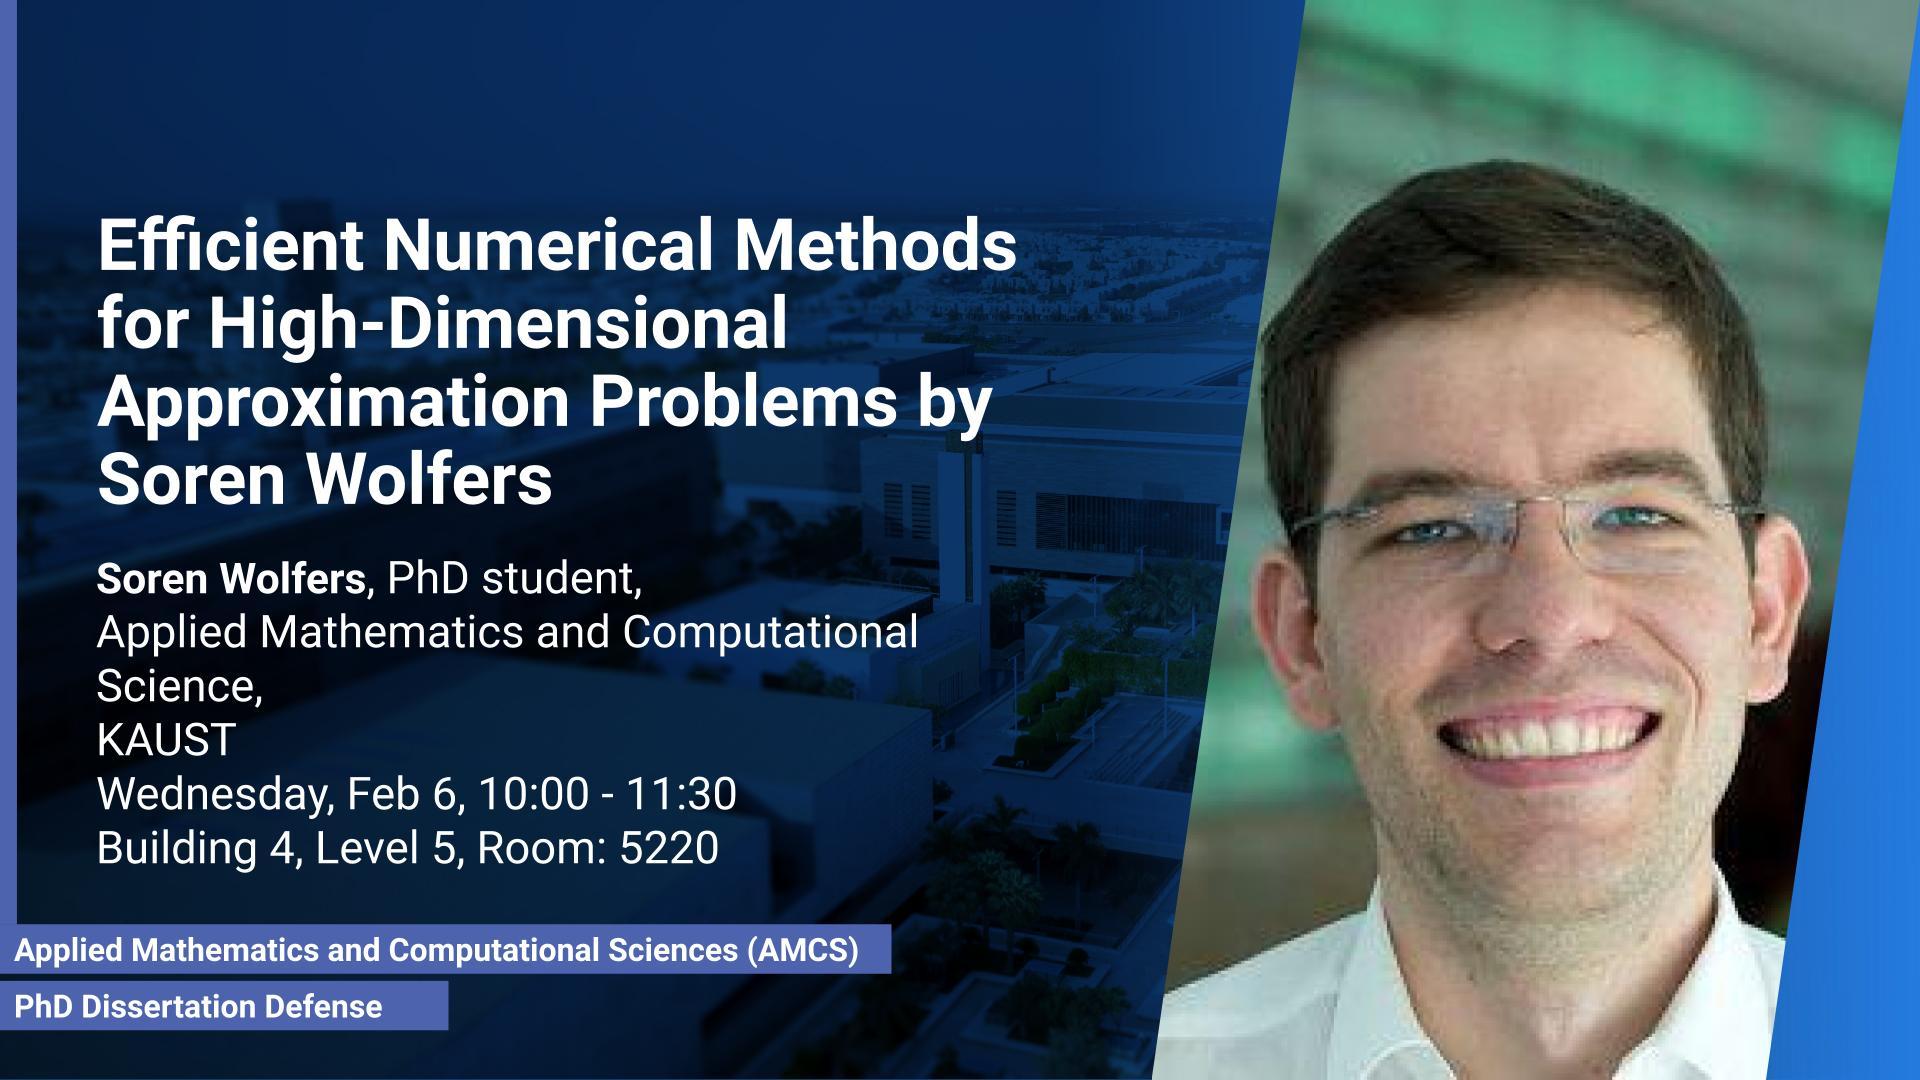 KAUST CEMSE AMCS STOCHNUM PhD Dissertation Defense Soren Wolfers Efficient Numerical Methods for High Dimensional Approximation Problems